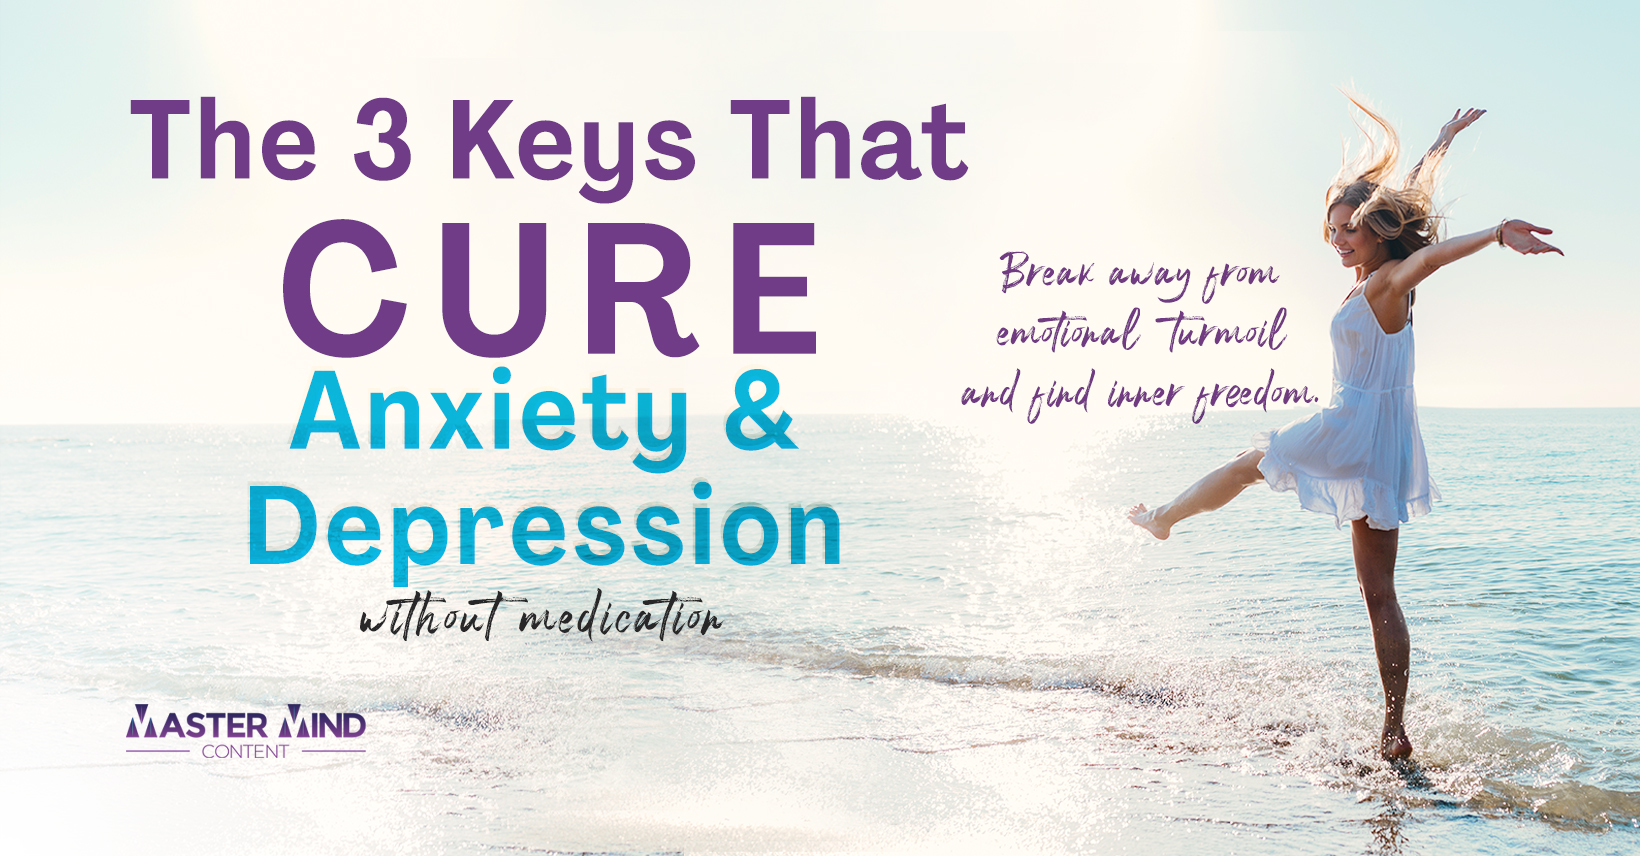 heal anxiety and depression